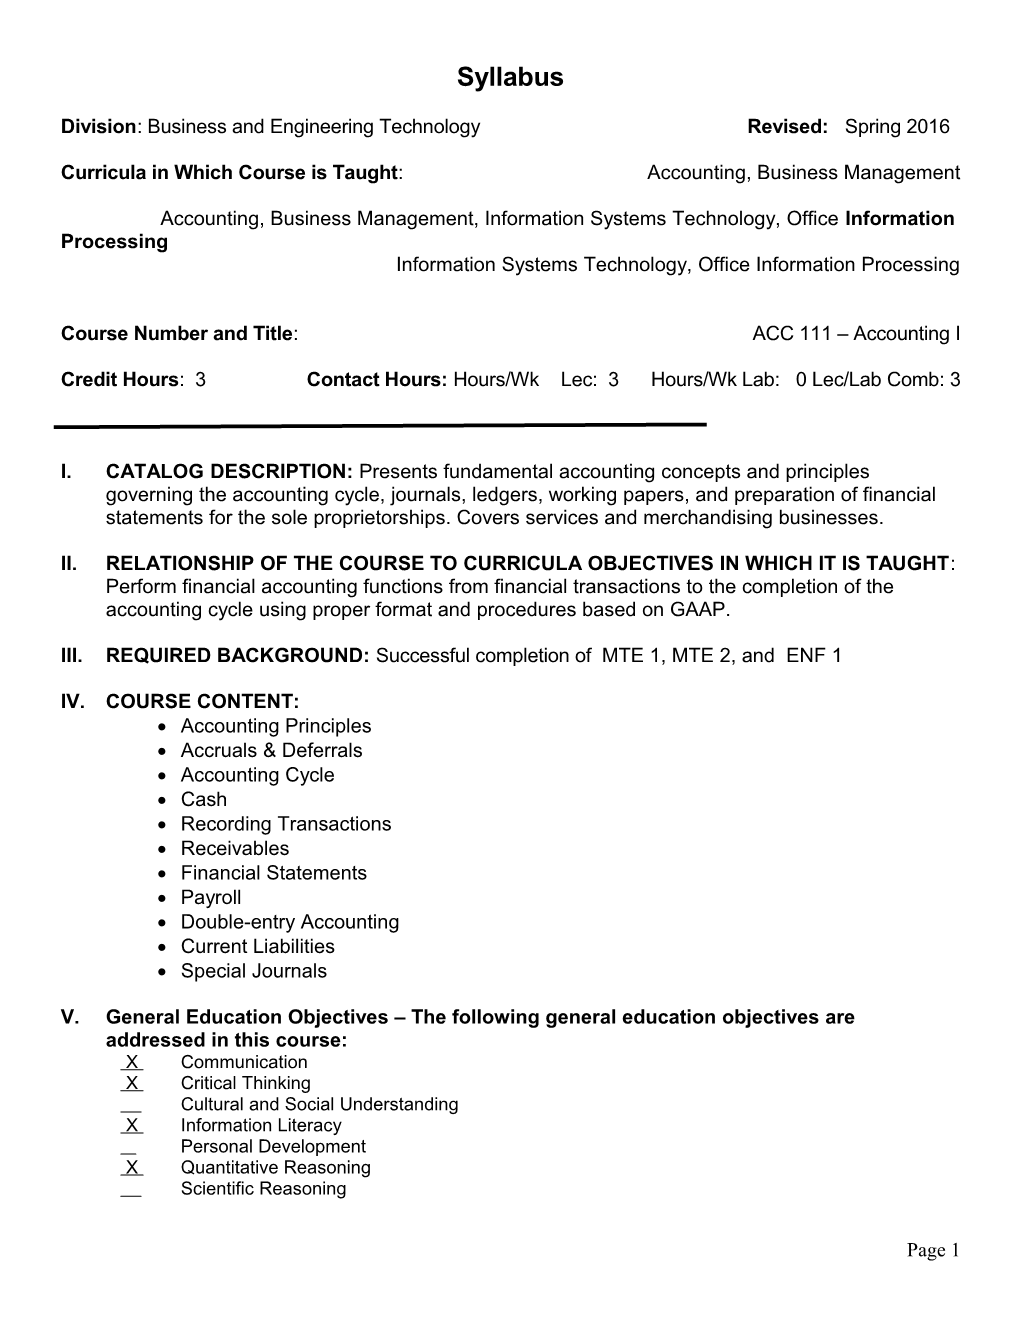 Division:Business and Engineering Technologyrevised: Spring 2016